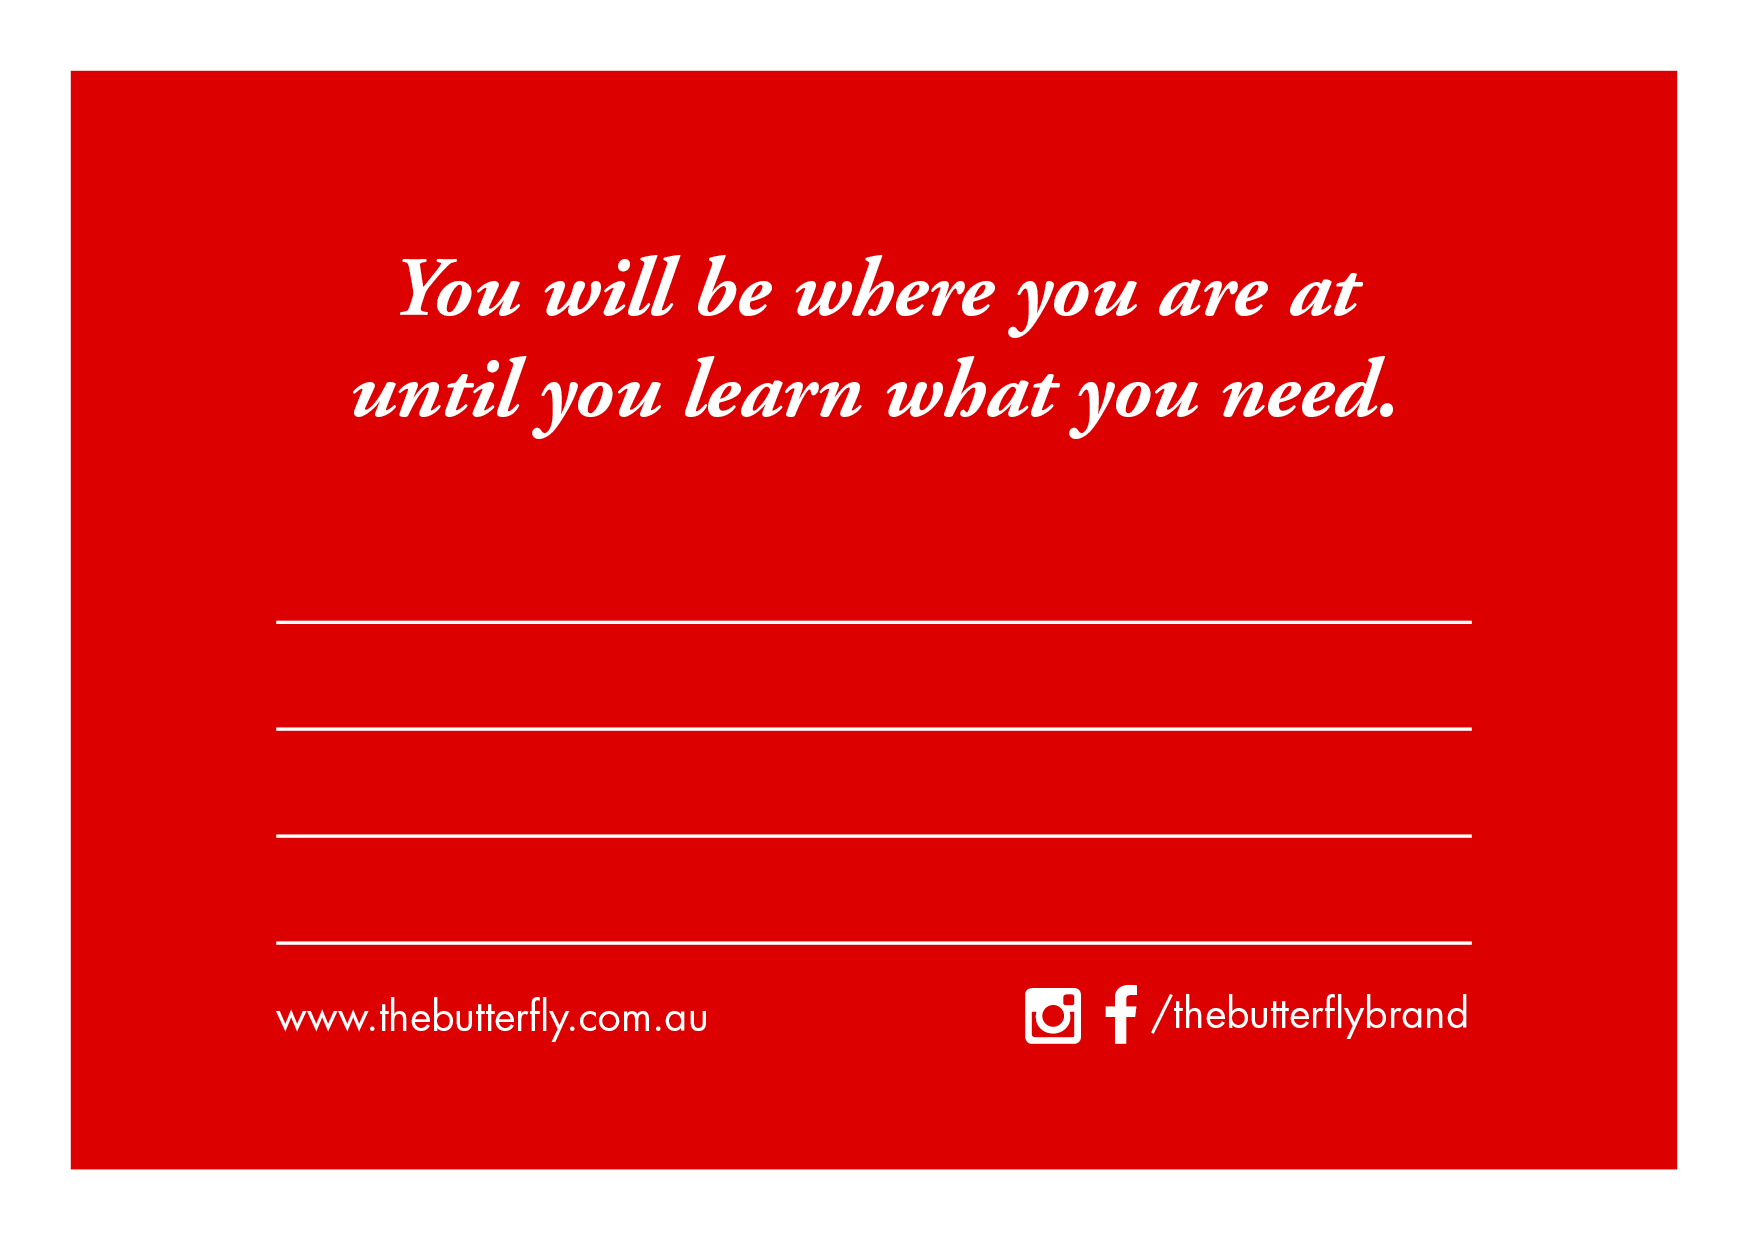 Red card, with lines for a message and a quote across the top: "You will be where you are at until you learn what you need".